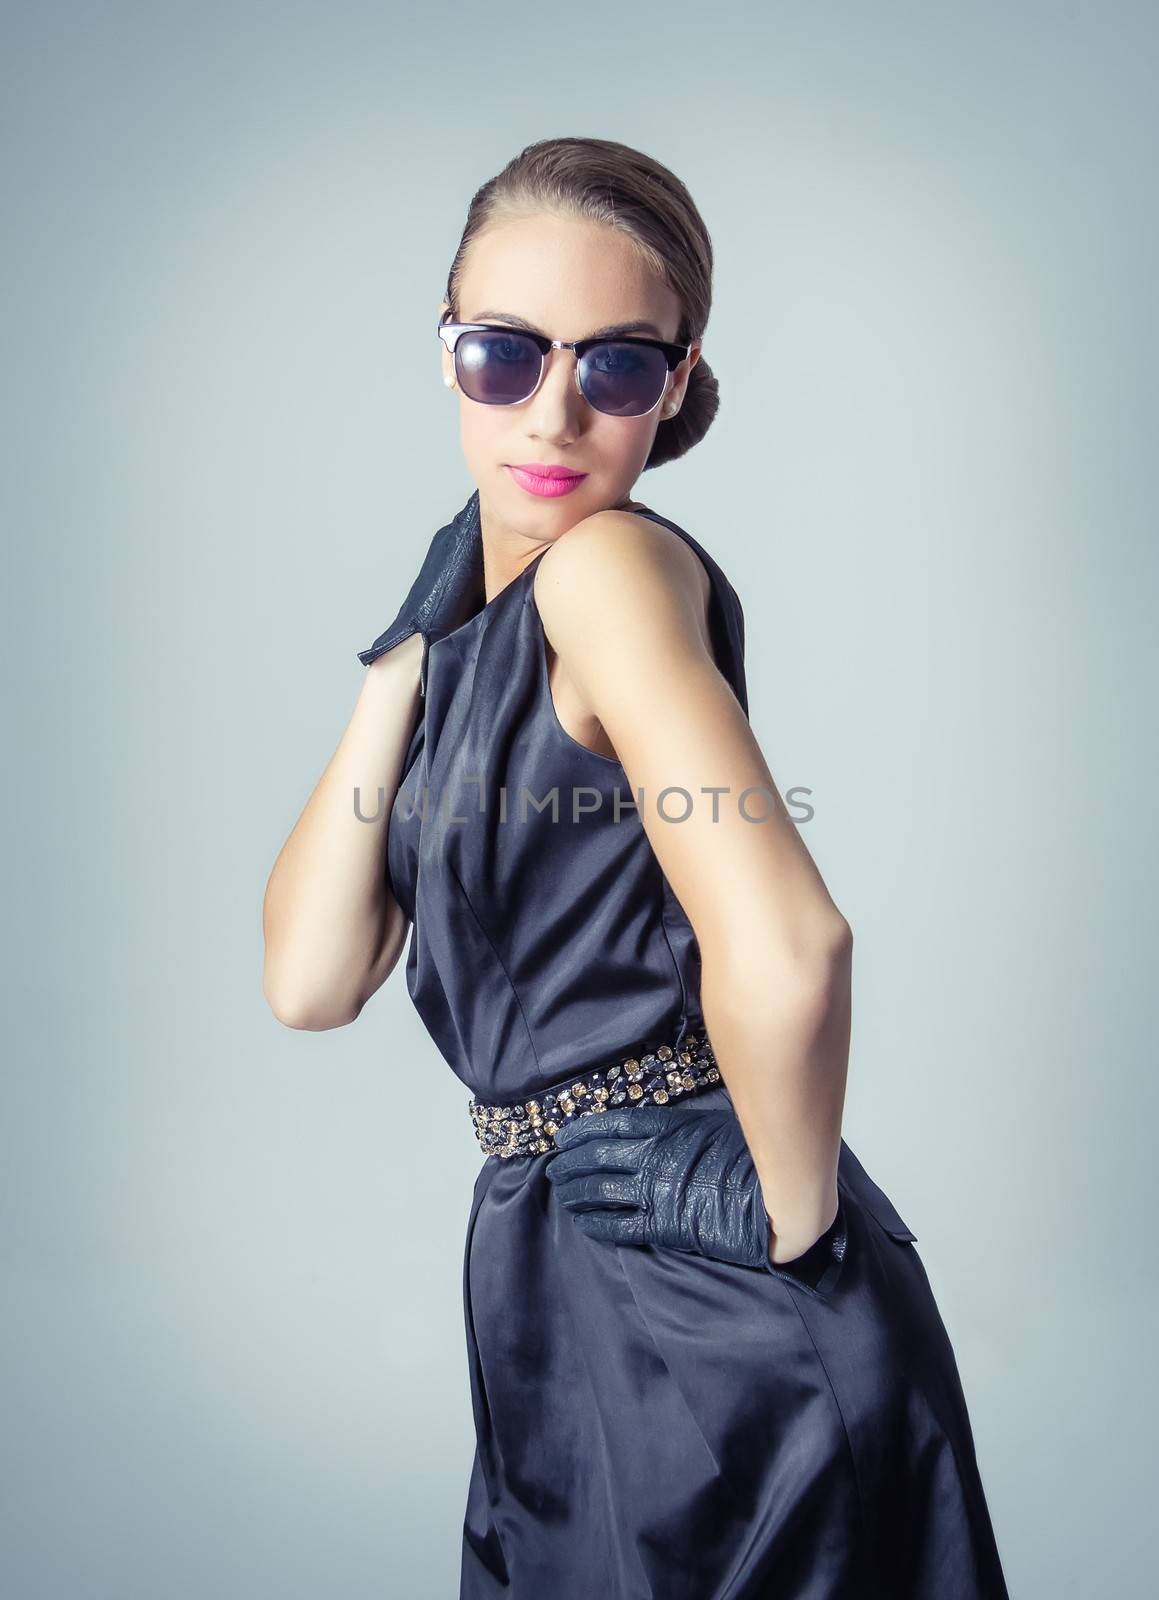 Fashion portrait of beautiful young girl with sunglasses in classic vintage style